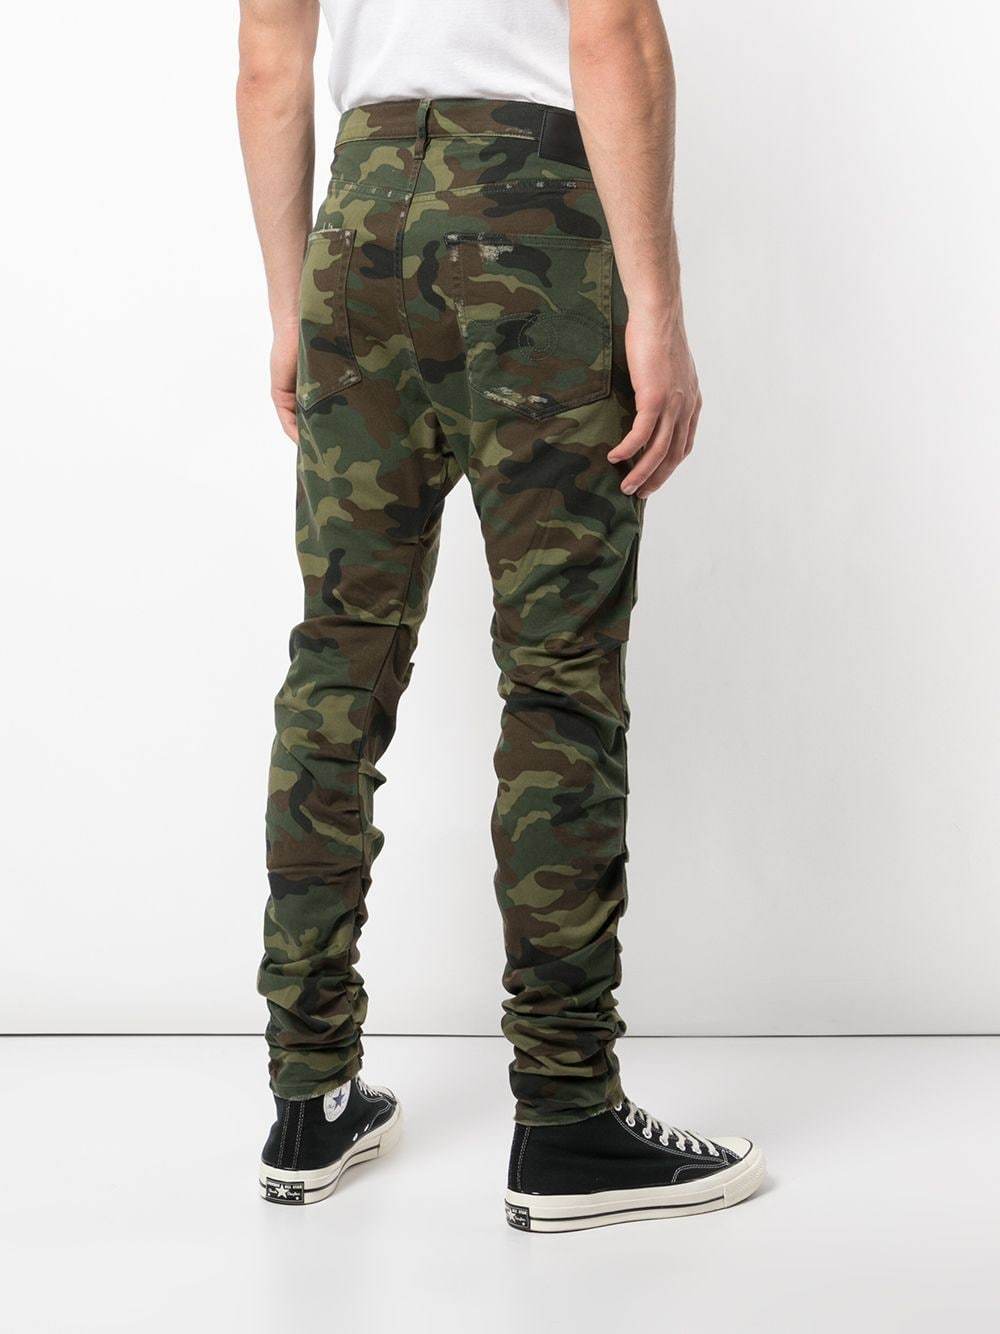 R13 Camouflage Ripped Jeans, $495 | farfetch.com | Lookastic